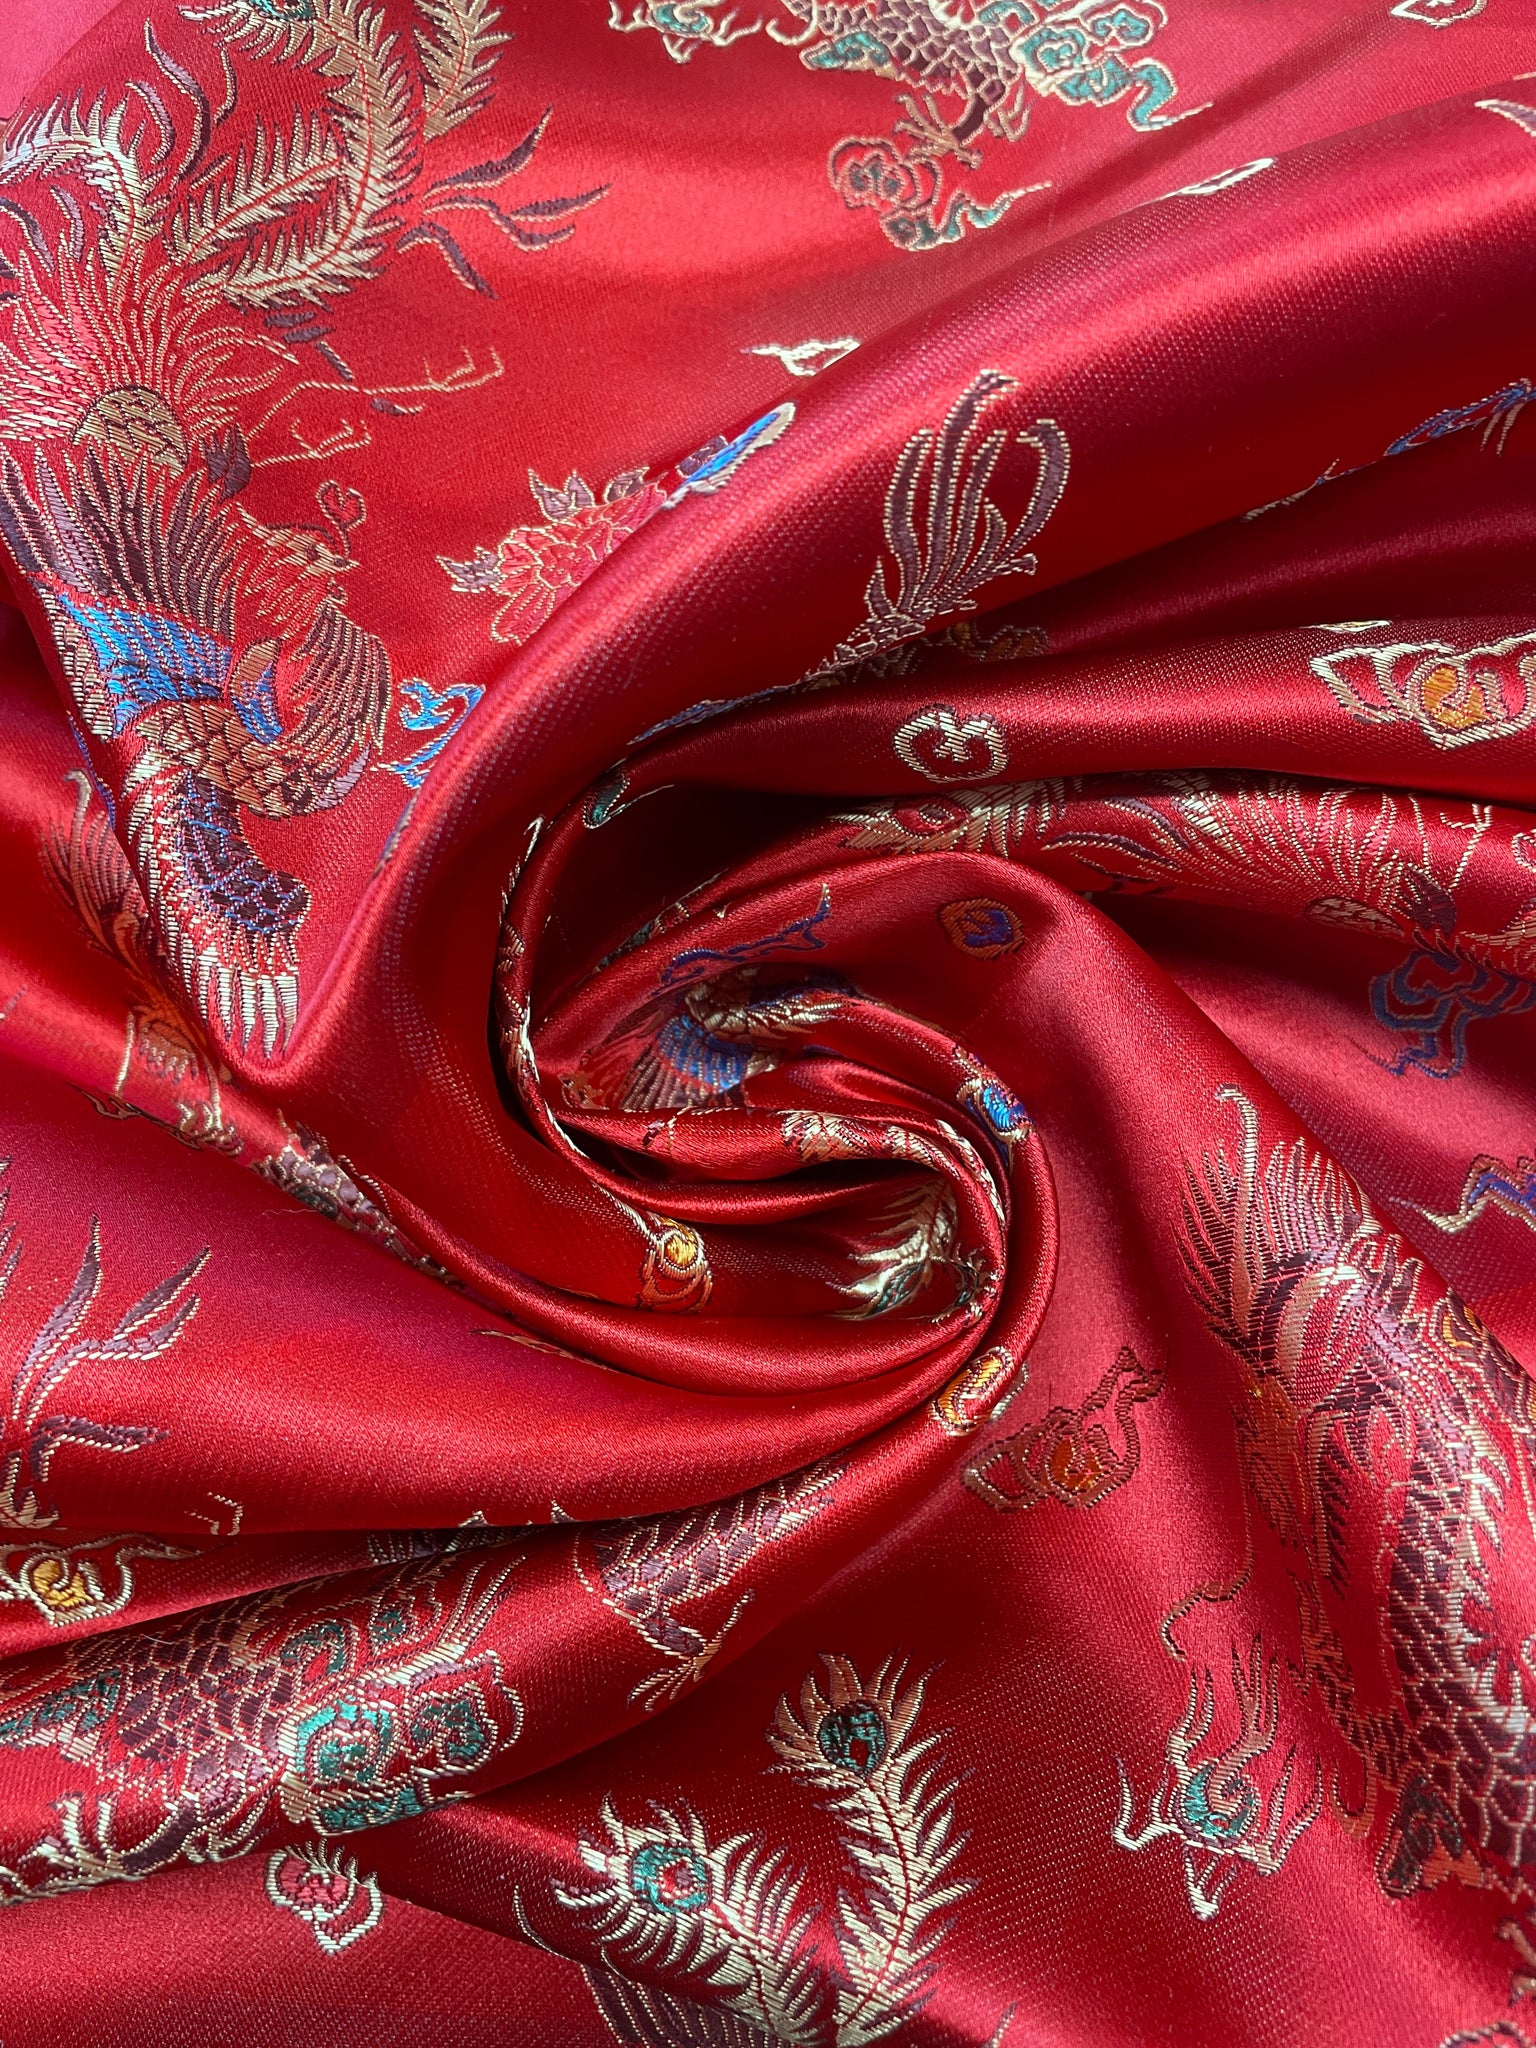 4 1/4 YD Polyester Satin Brocade - Red with Dragons